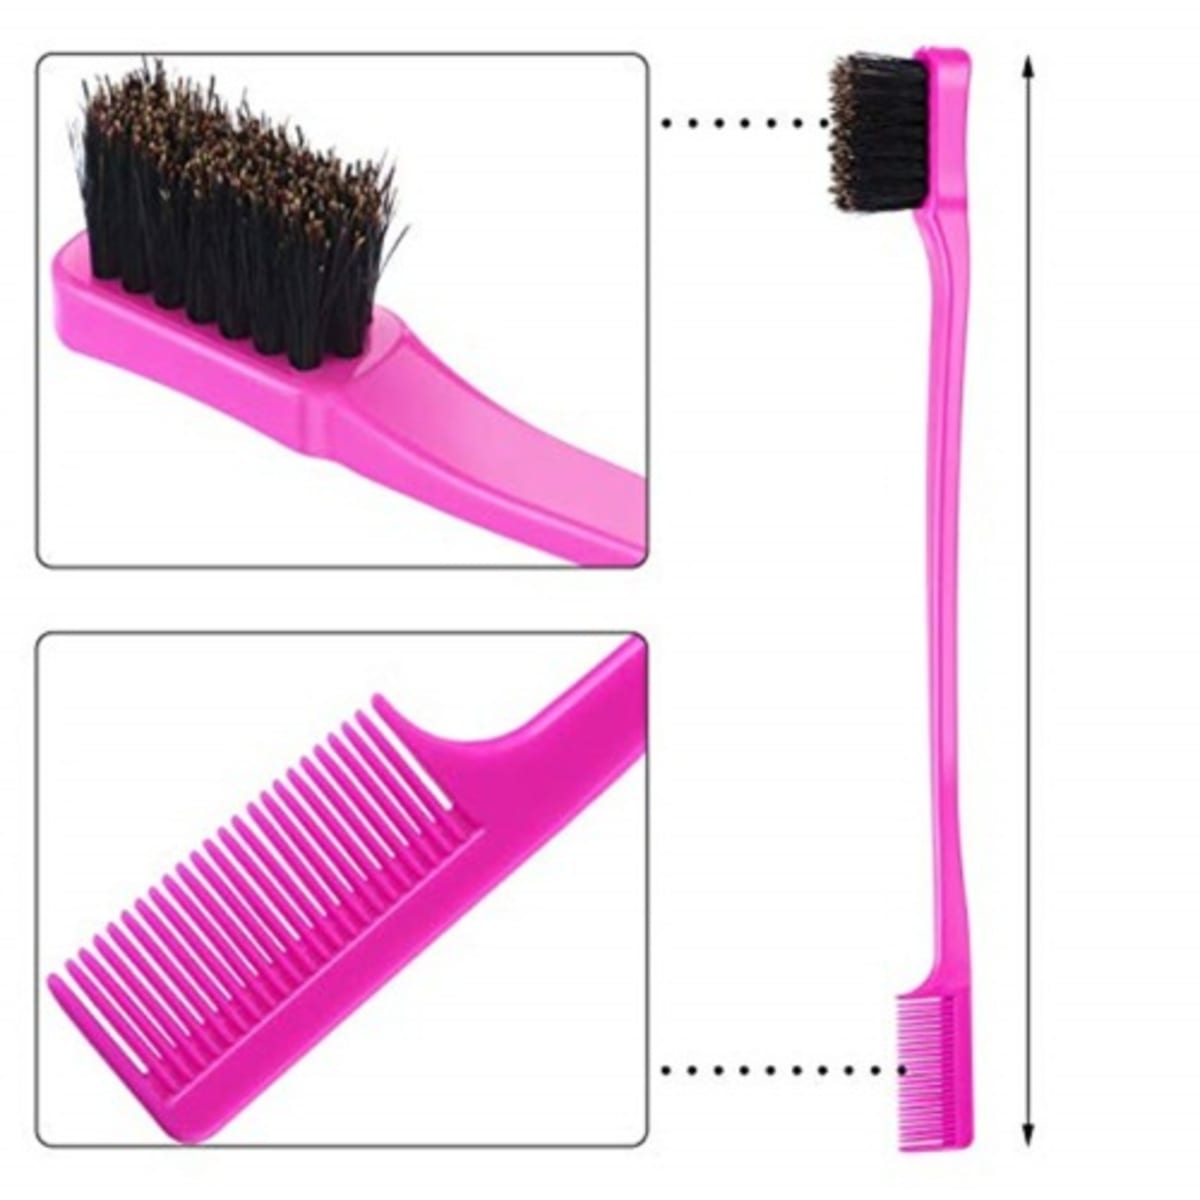 4 Pcs] Double Sided Edge Control Hair Comb Hair Styling Tool Hair Brush